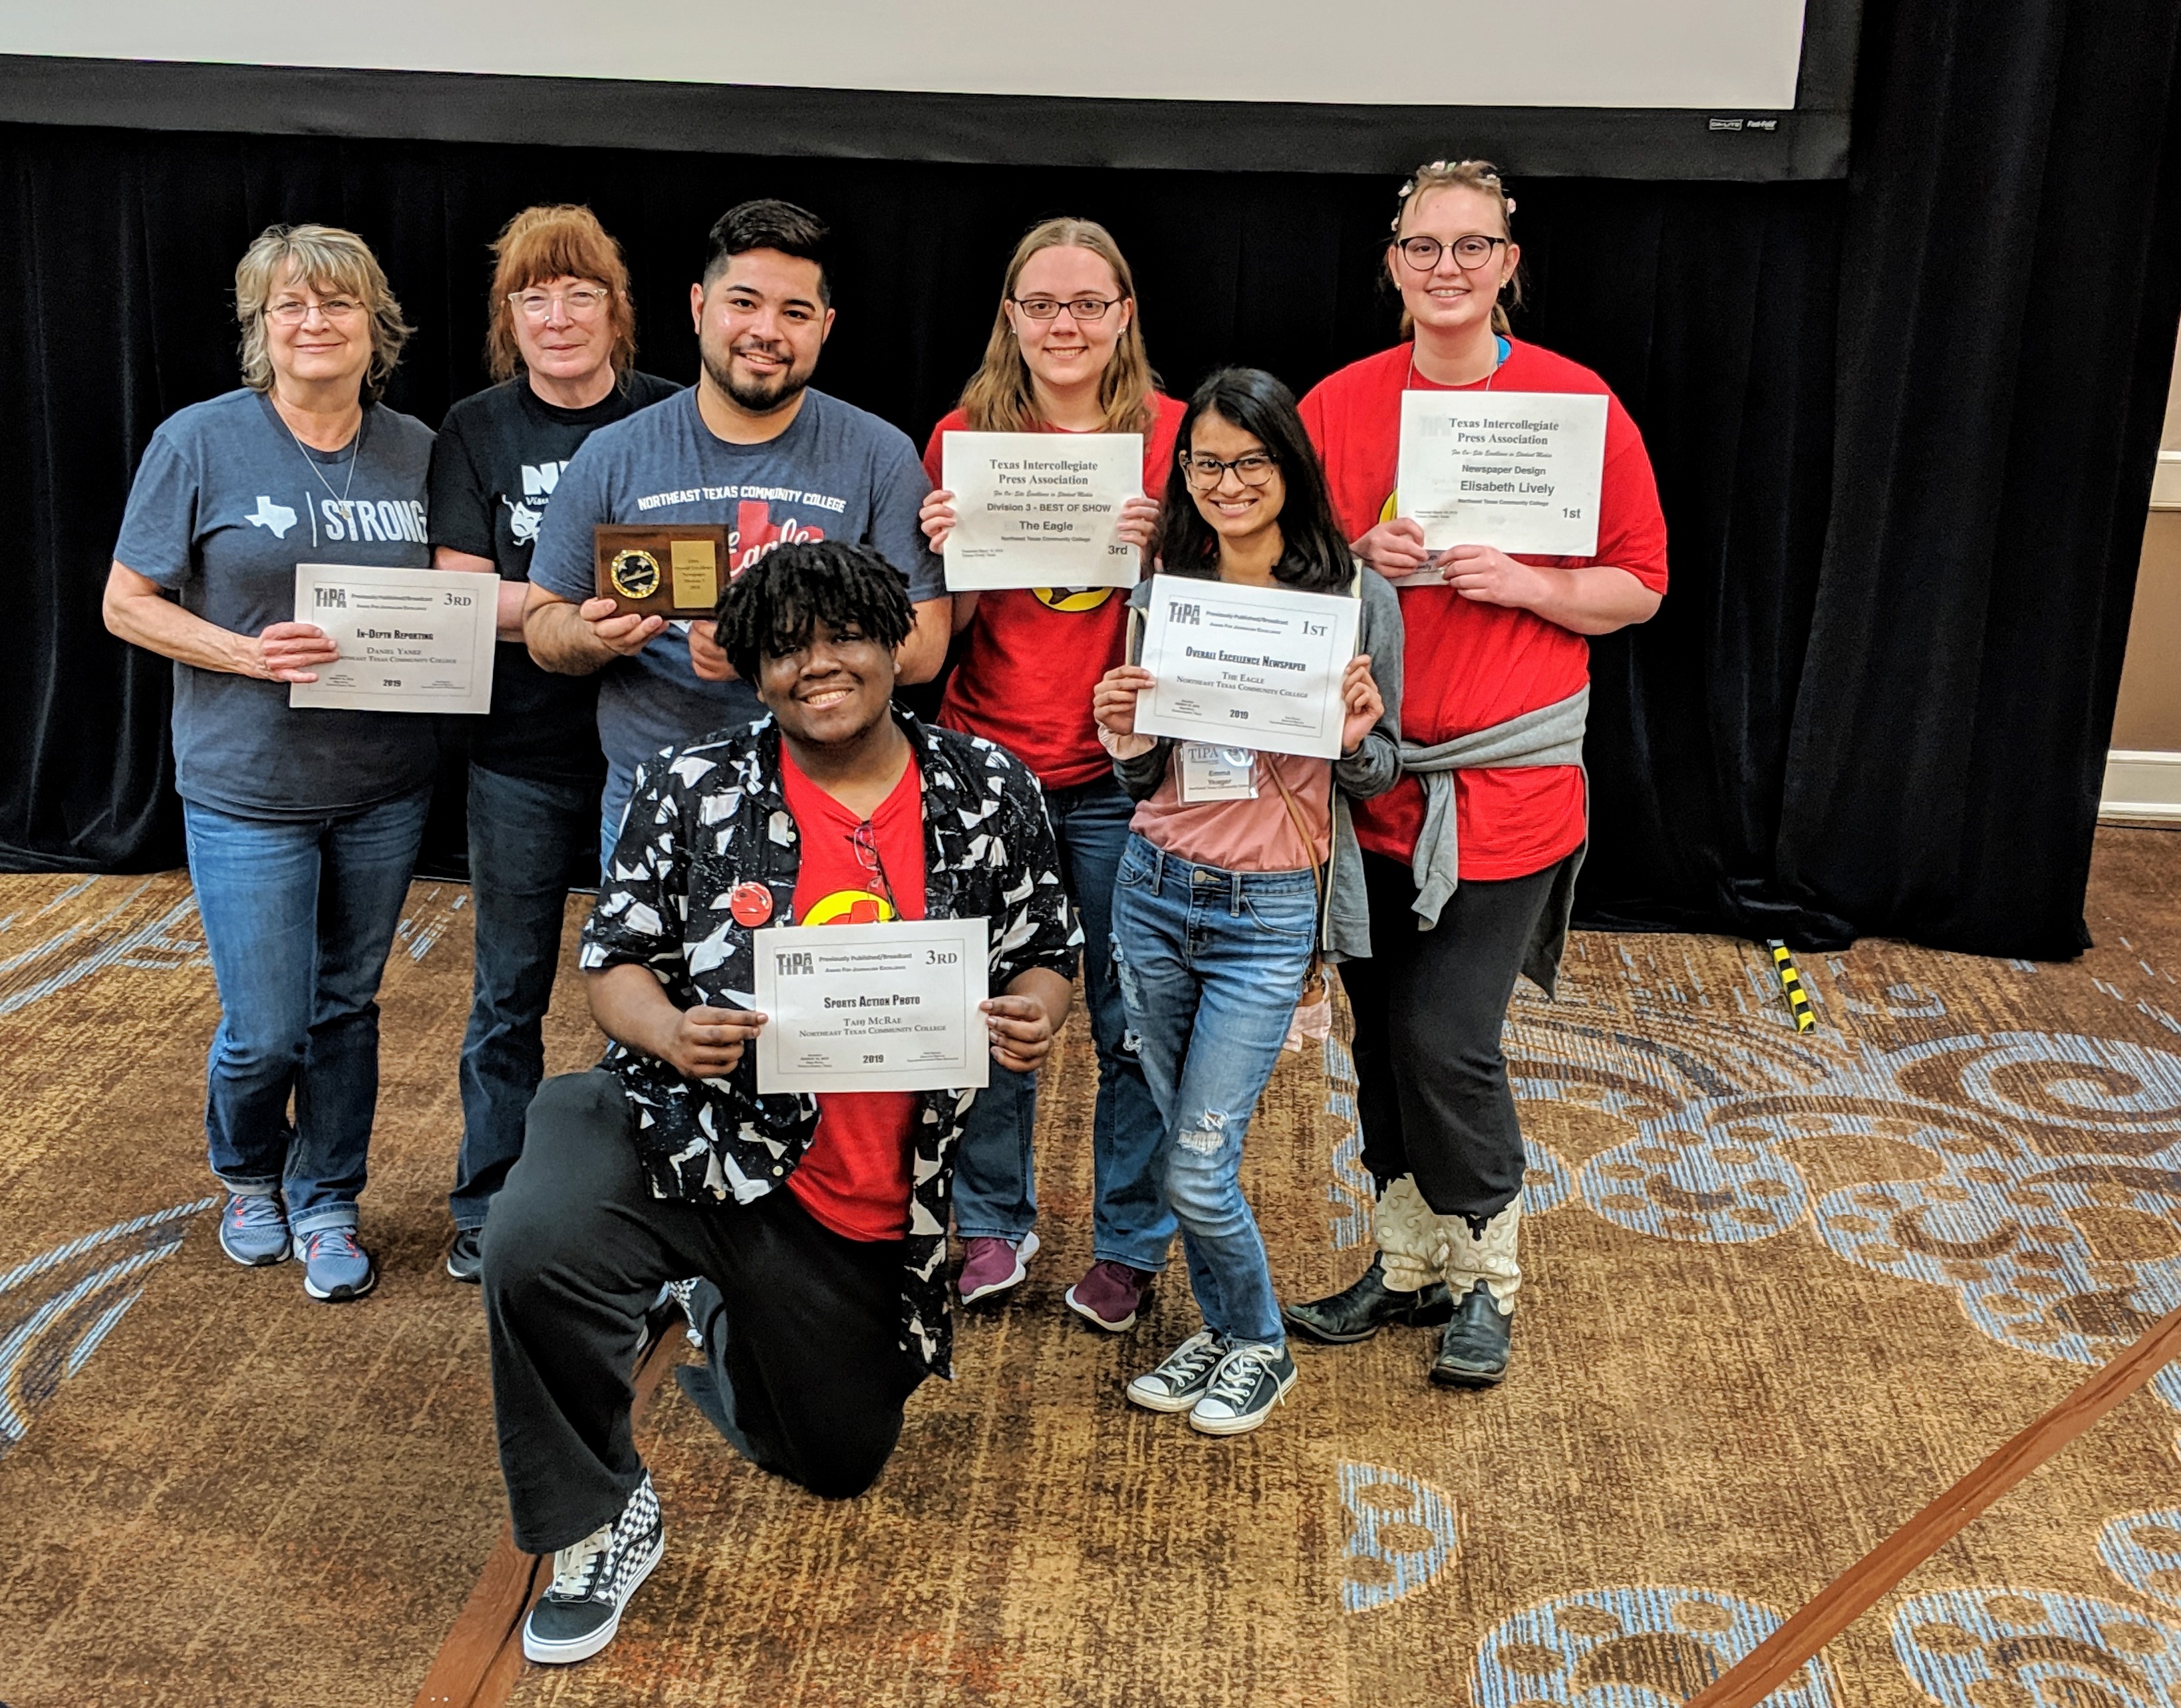 Smith with students at 2019 TIPA conference